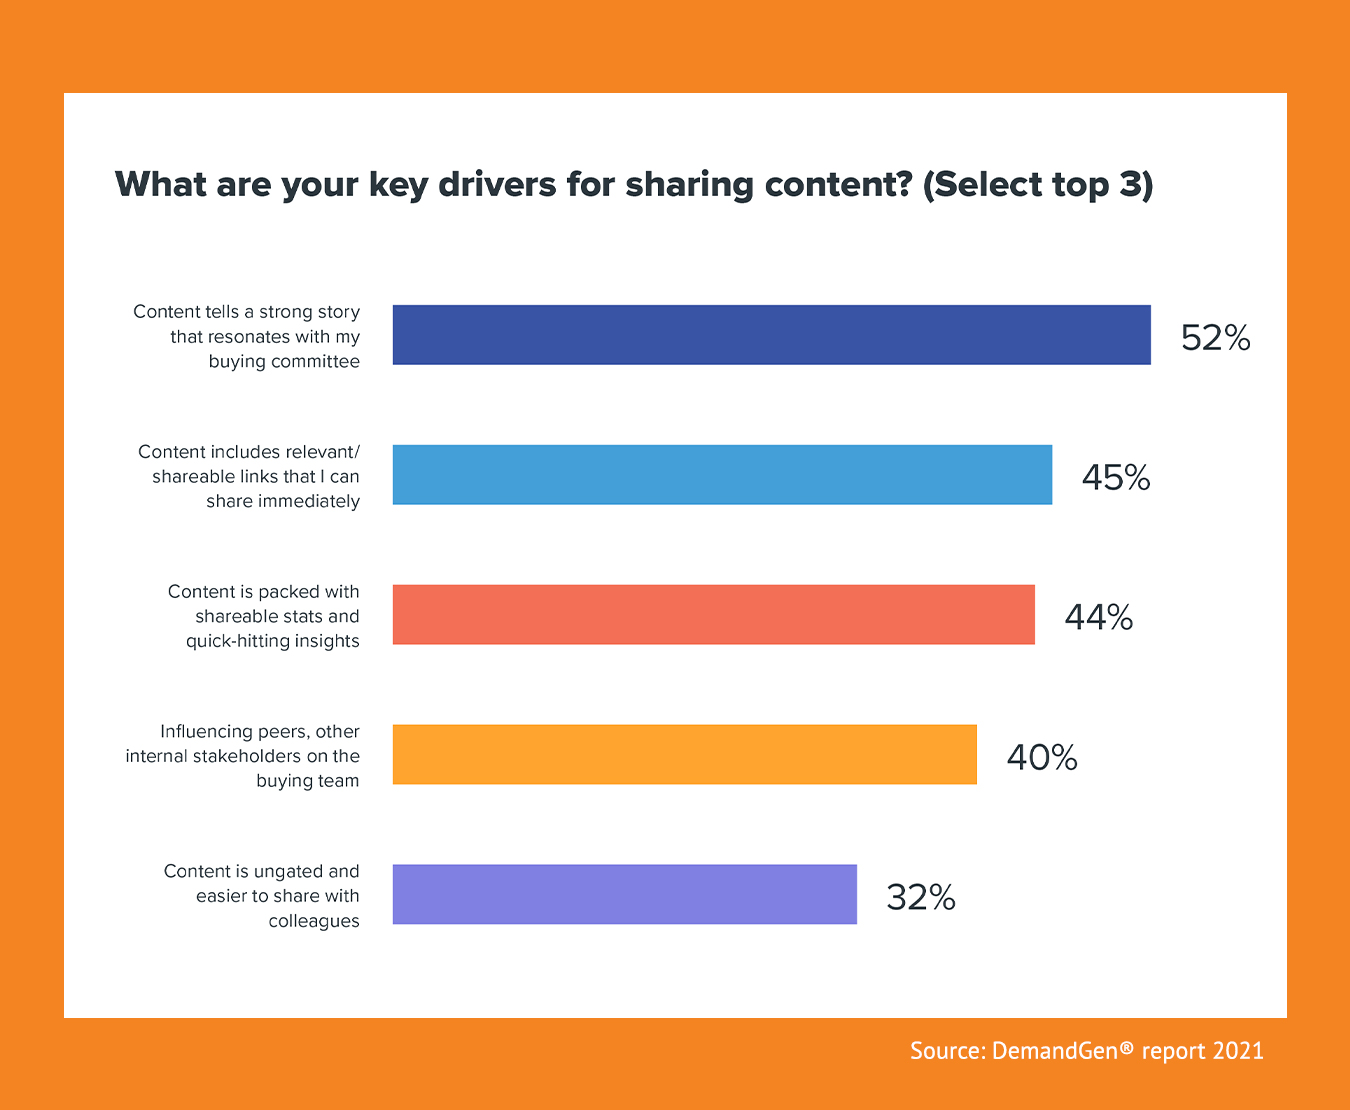 Graphic shows key drivers for B2B Buyers sharing content. 52% share content the tells a strong story that resonates with their buying committee. 45% share content that includes relevant/shareable links that they can share immediately. 44% share content that is packed with shareable stats and quick-hitting insights. 40% share content from influencing peers, other internal stakeholders on the buying team. 32% share content that is ungated and easier to share with colleaugues.